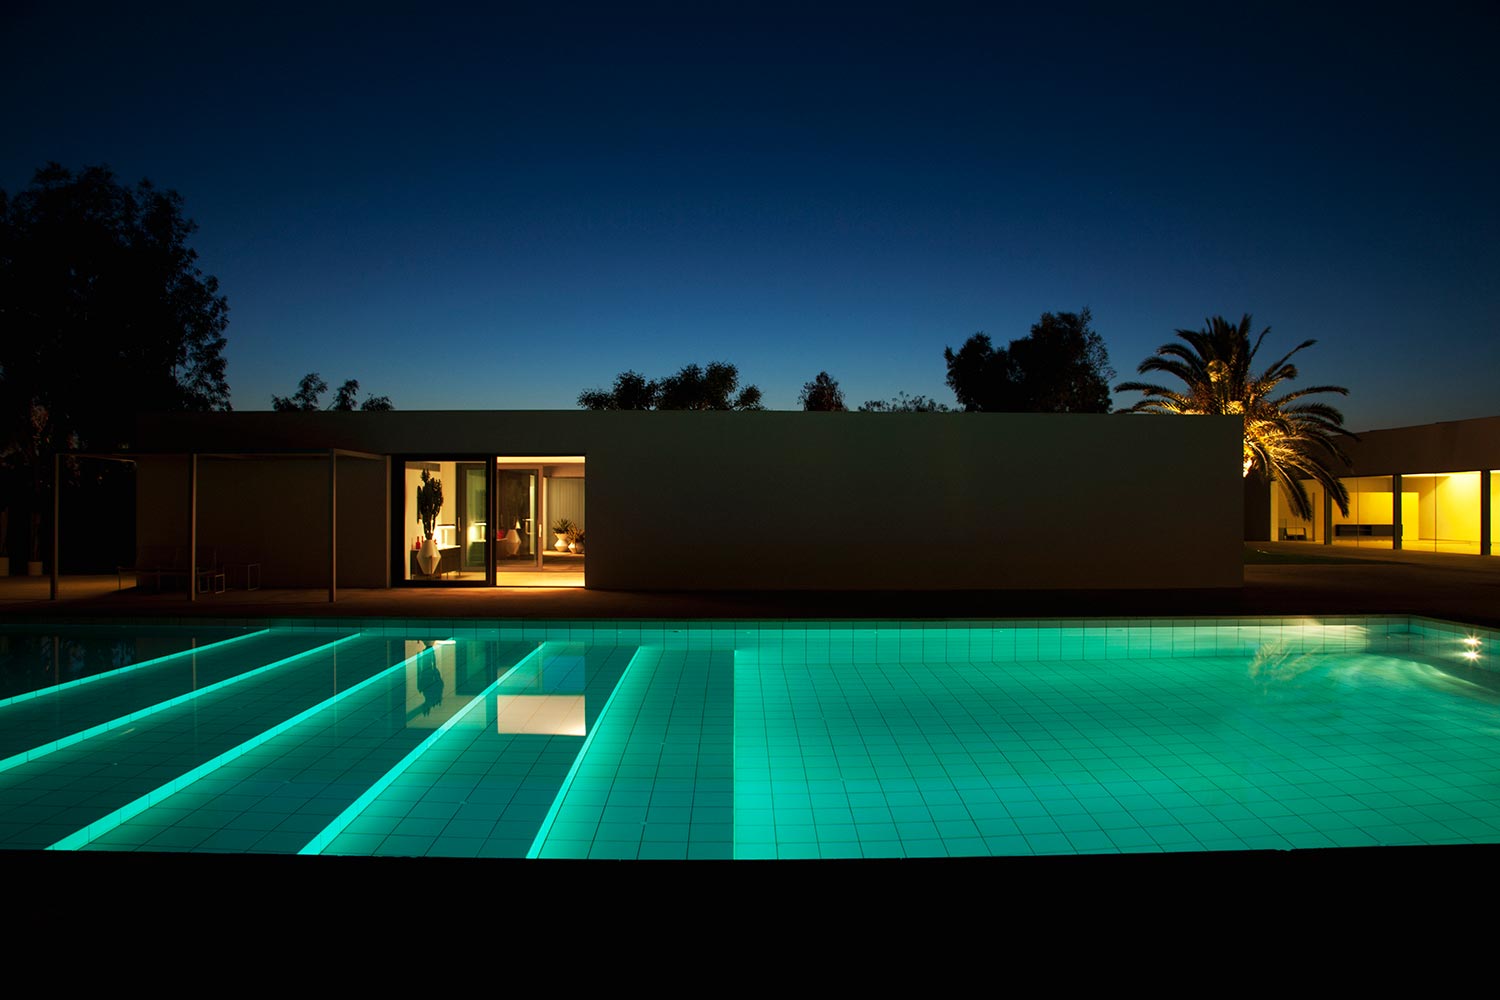 Pool outside modern house at twilight